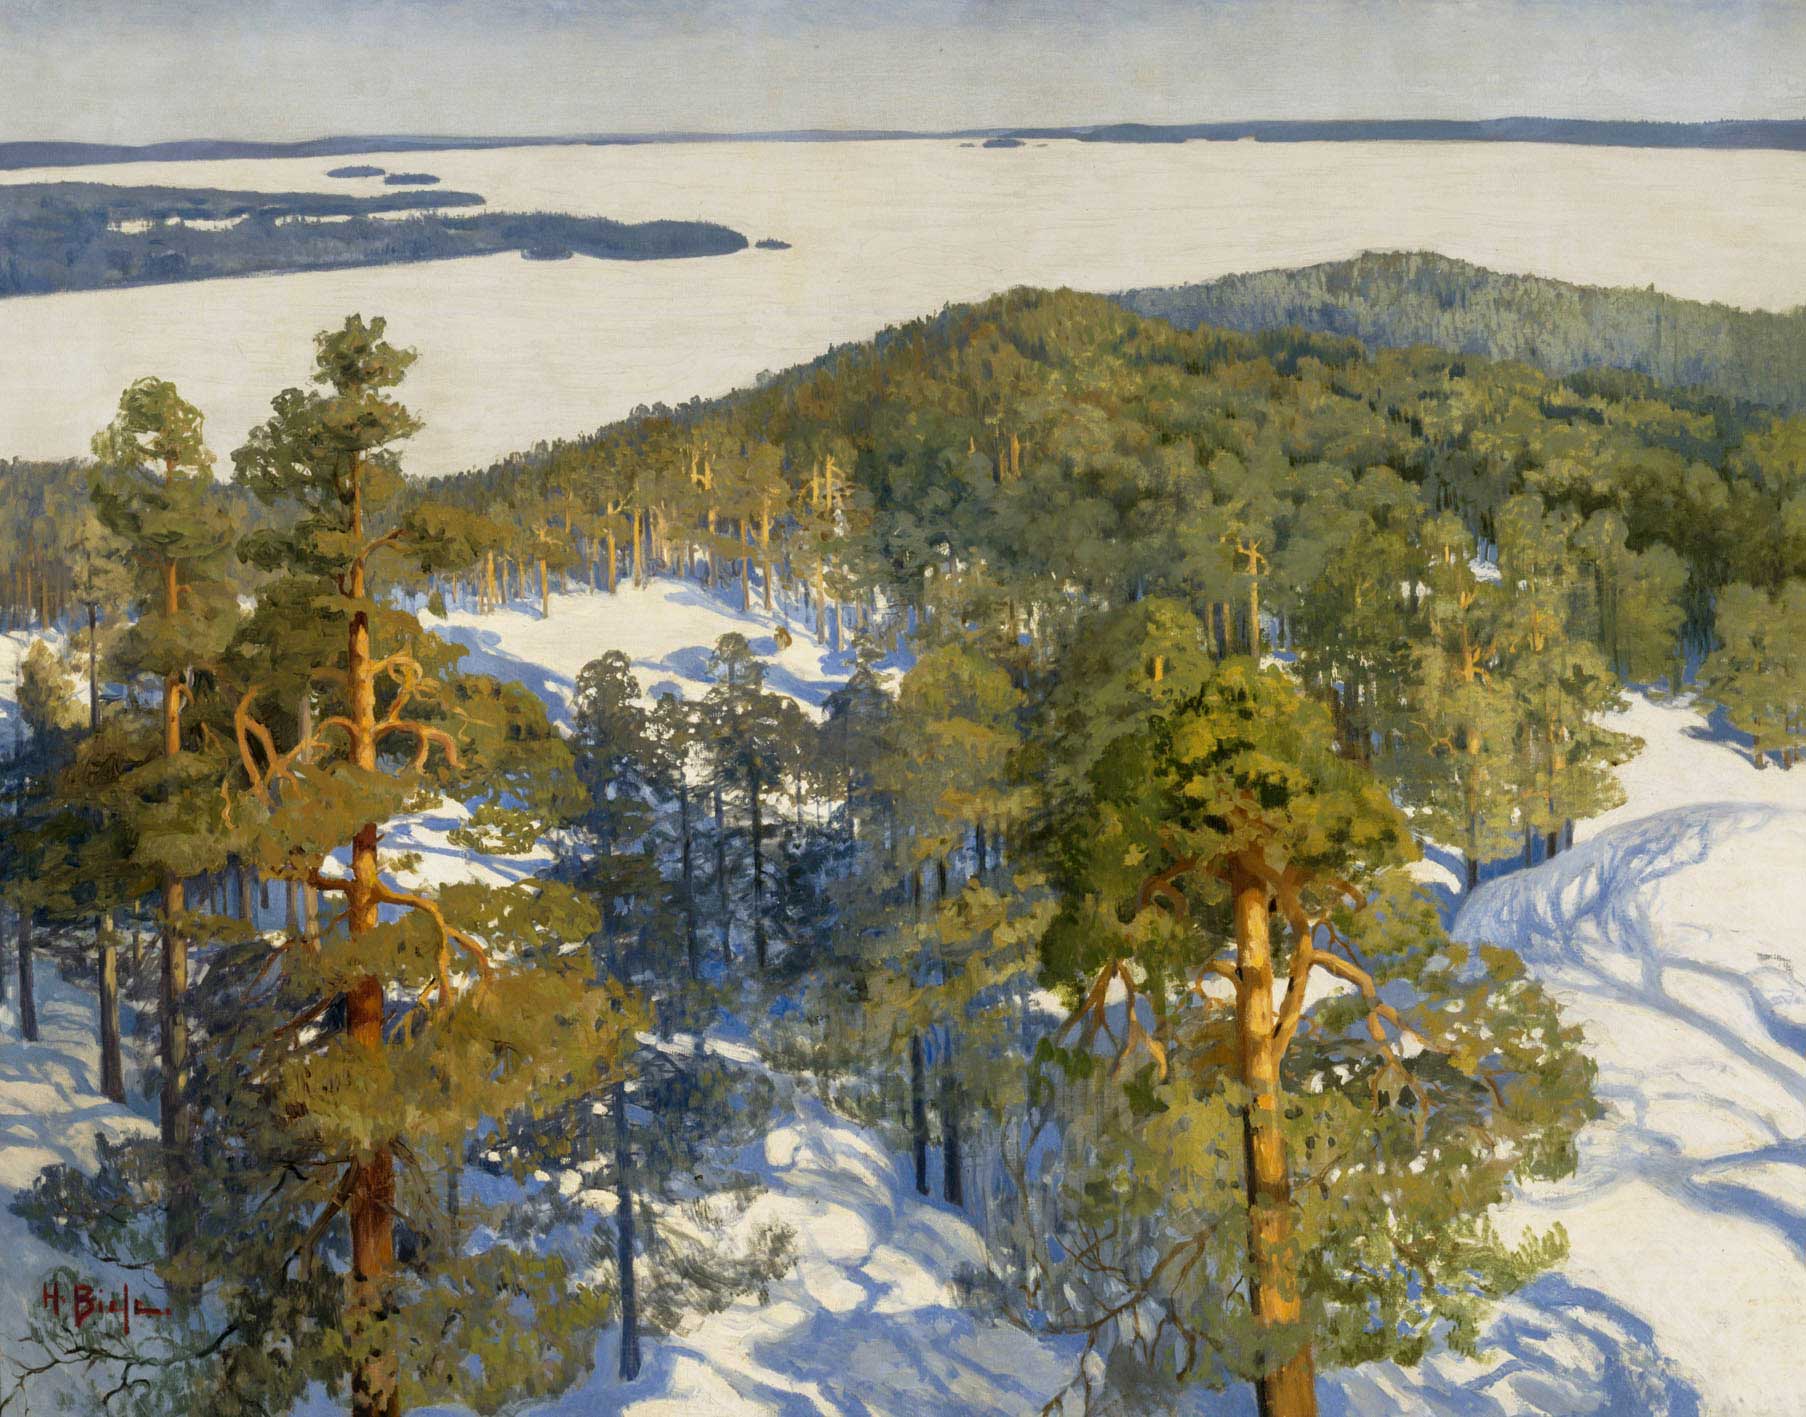 Set atop a mountain, gazing down at the white landscape below. View from the Ridge is a breathtaking painting of an evergreen forest high atop the ridge overlooking the lake below. 